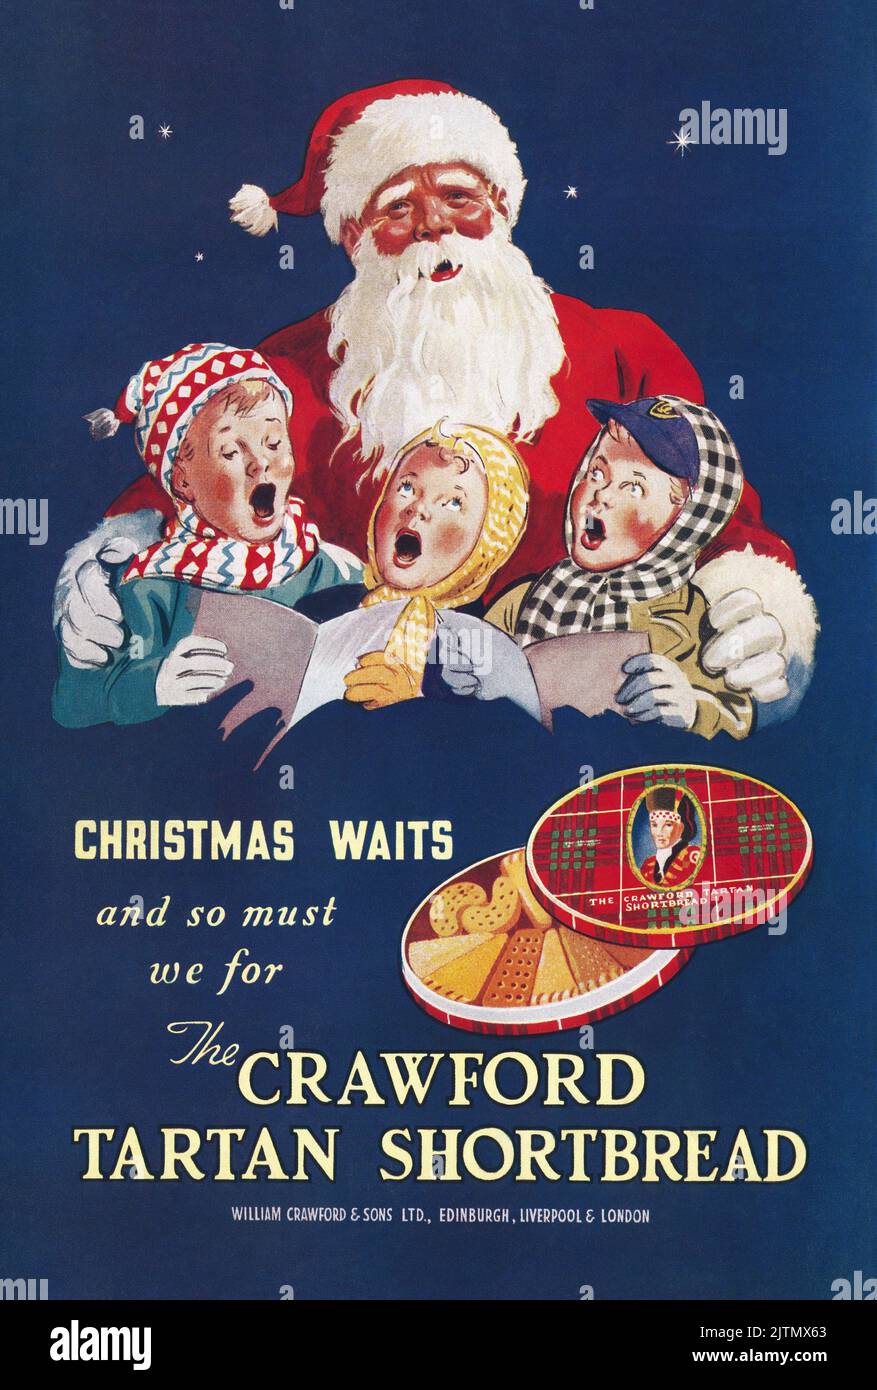 1948 British Christmas advertisement for Crawford Tartan Shortbread biscuits. Stock Photo